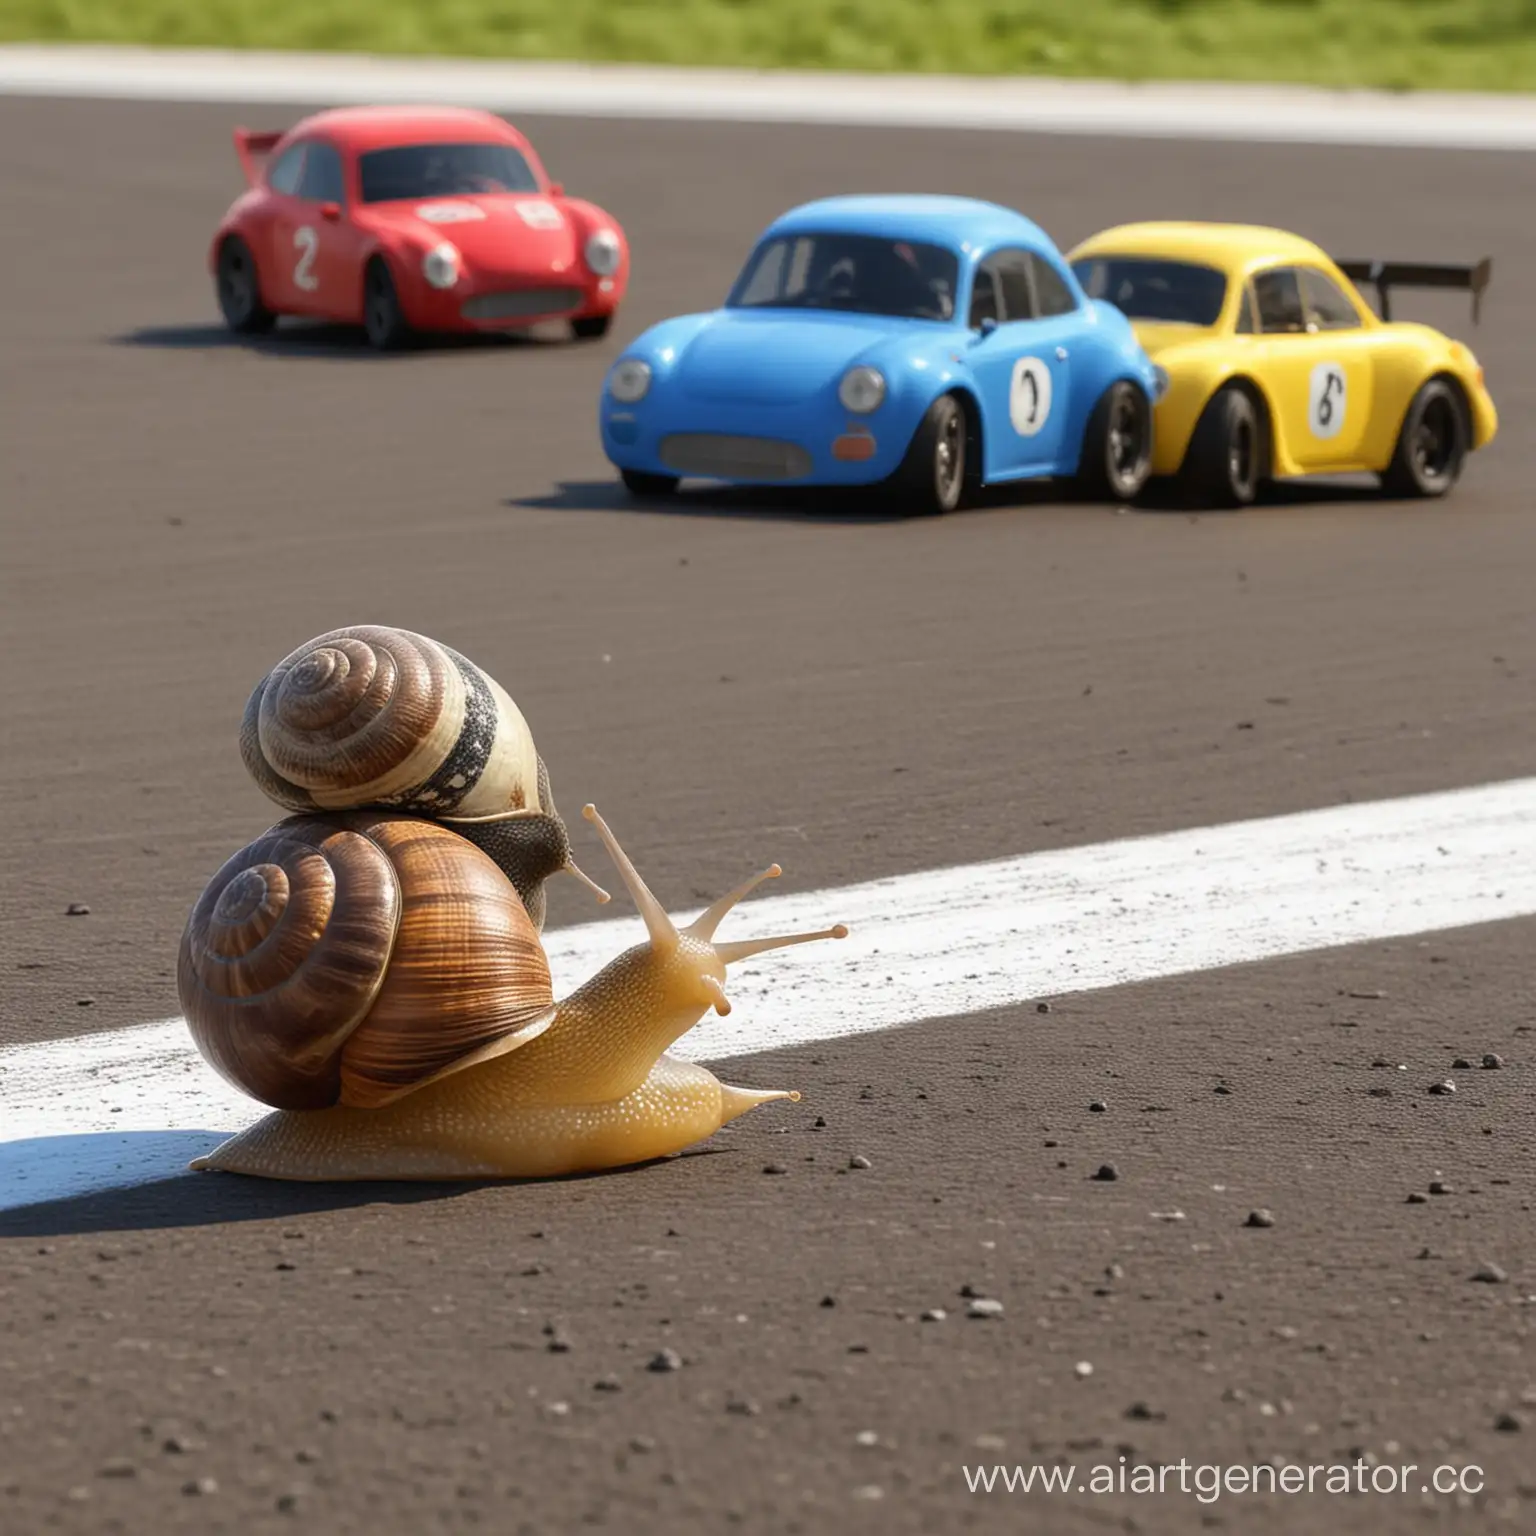 Victorious-Snail-Racer-Triumphing-Over-Speedy-Cars